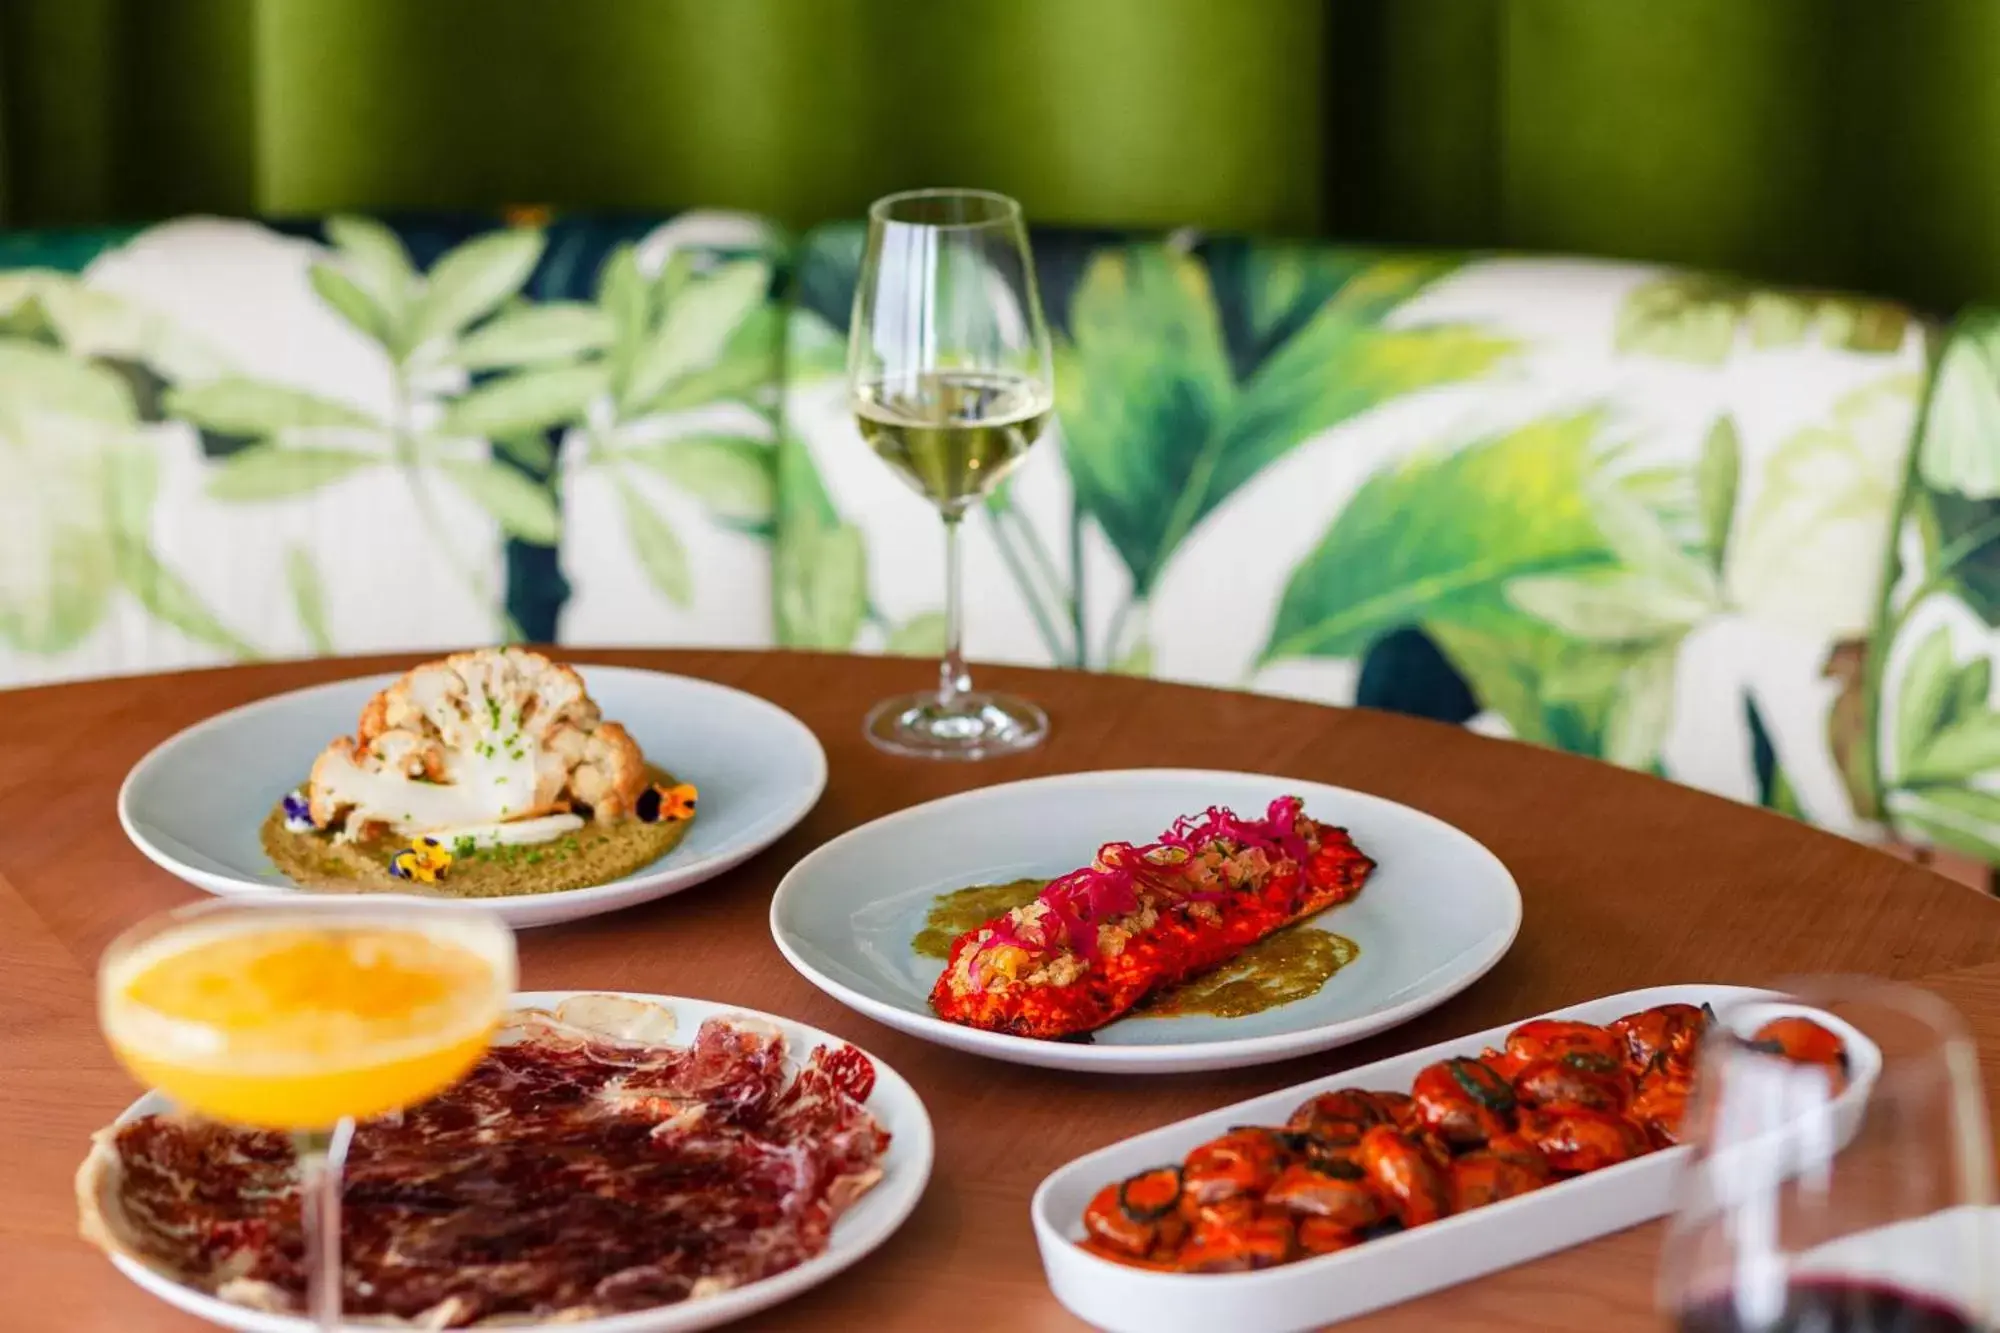 Food, Lunch and Dinner in The Standard, Ibiza - Adults Only